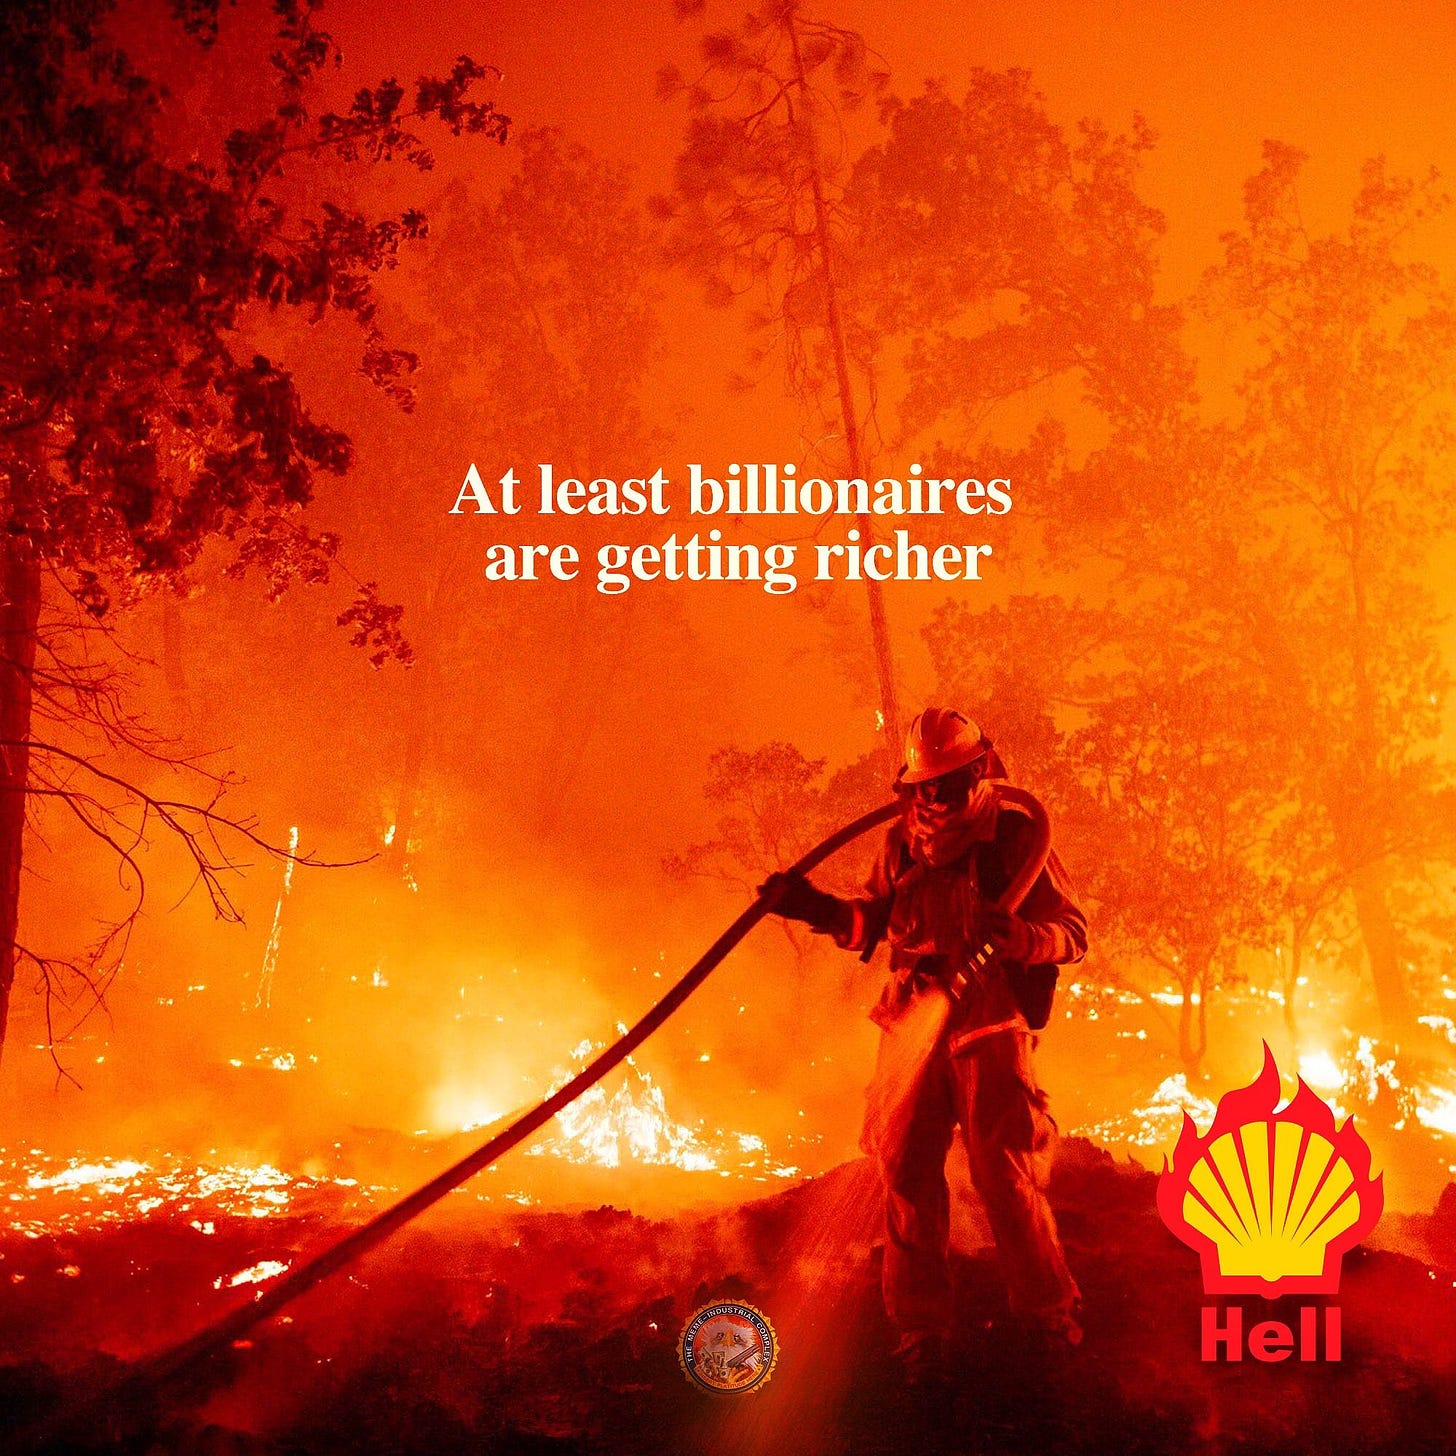 May be an image of 1 person, fire and text that says 'At least billionaires are getting richer Hell'